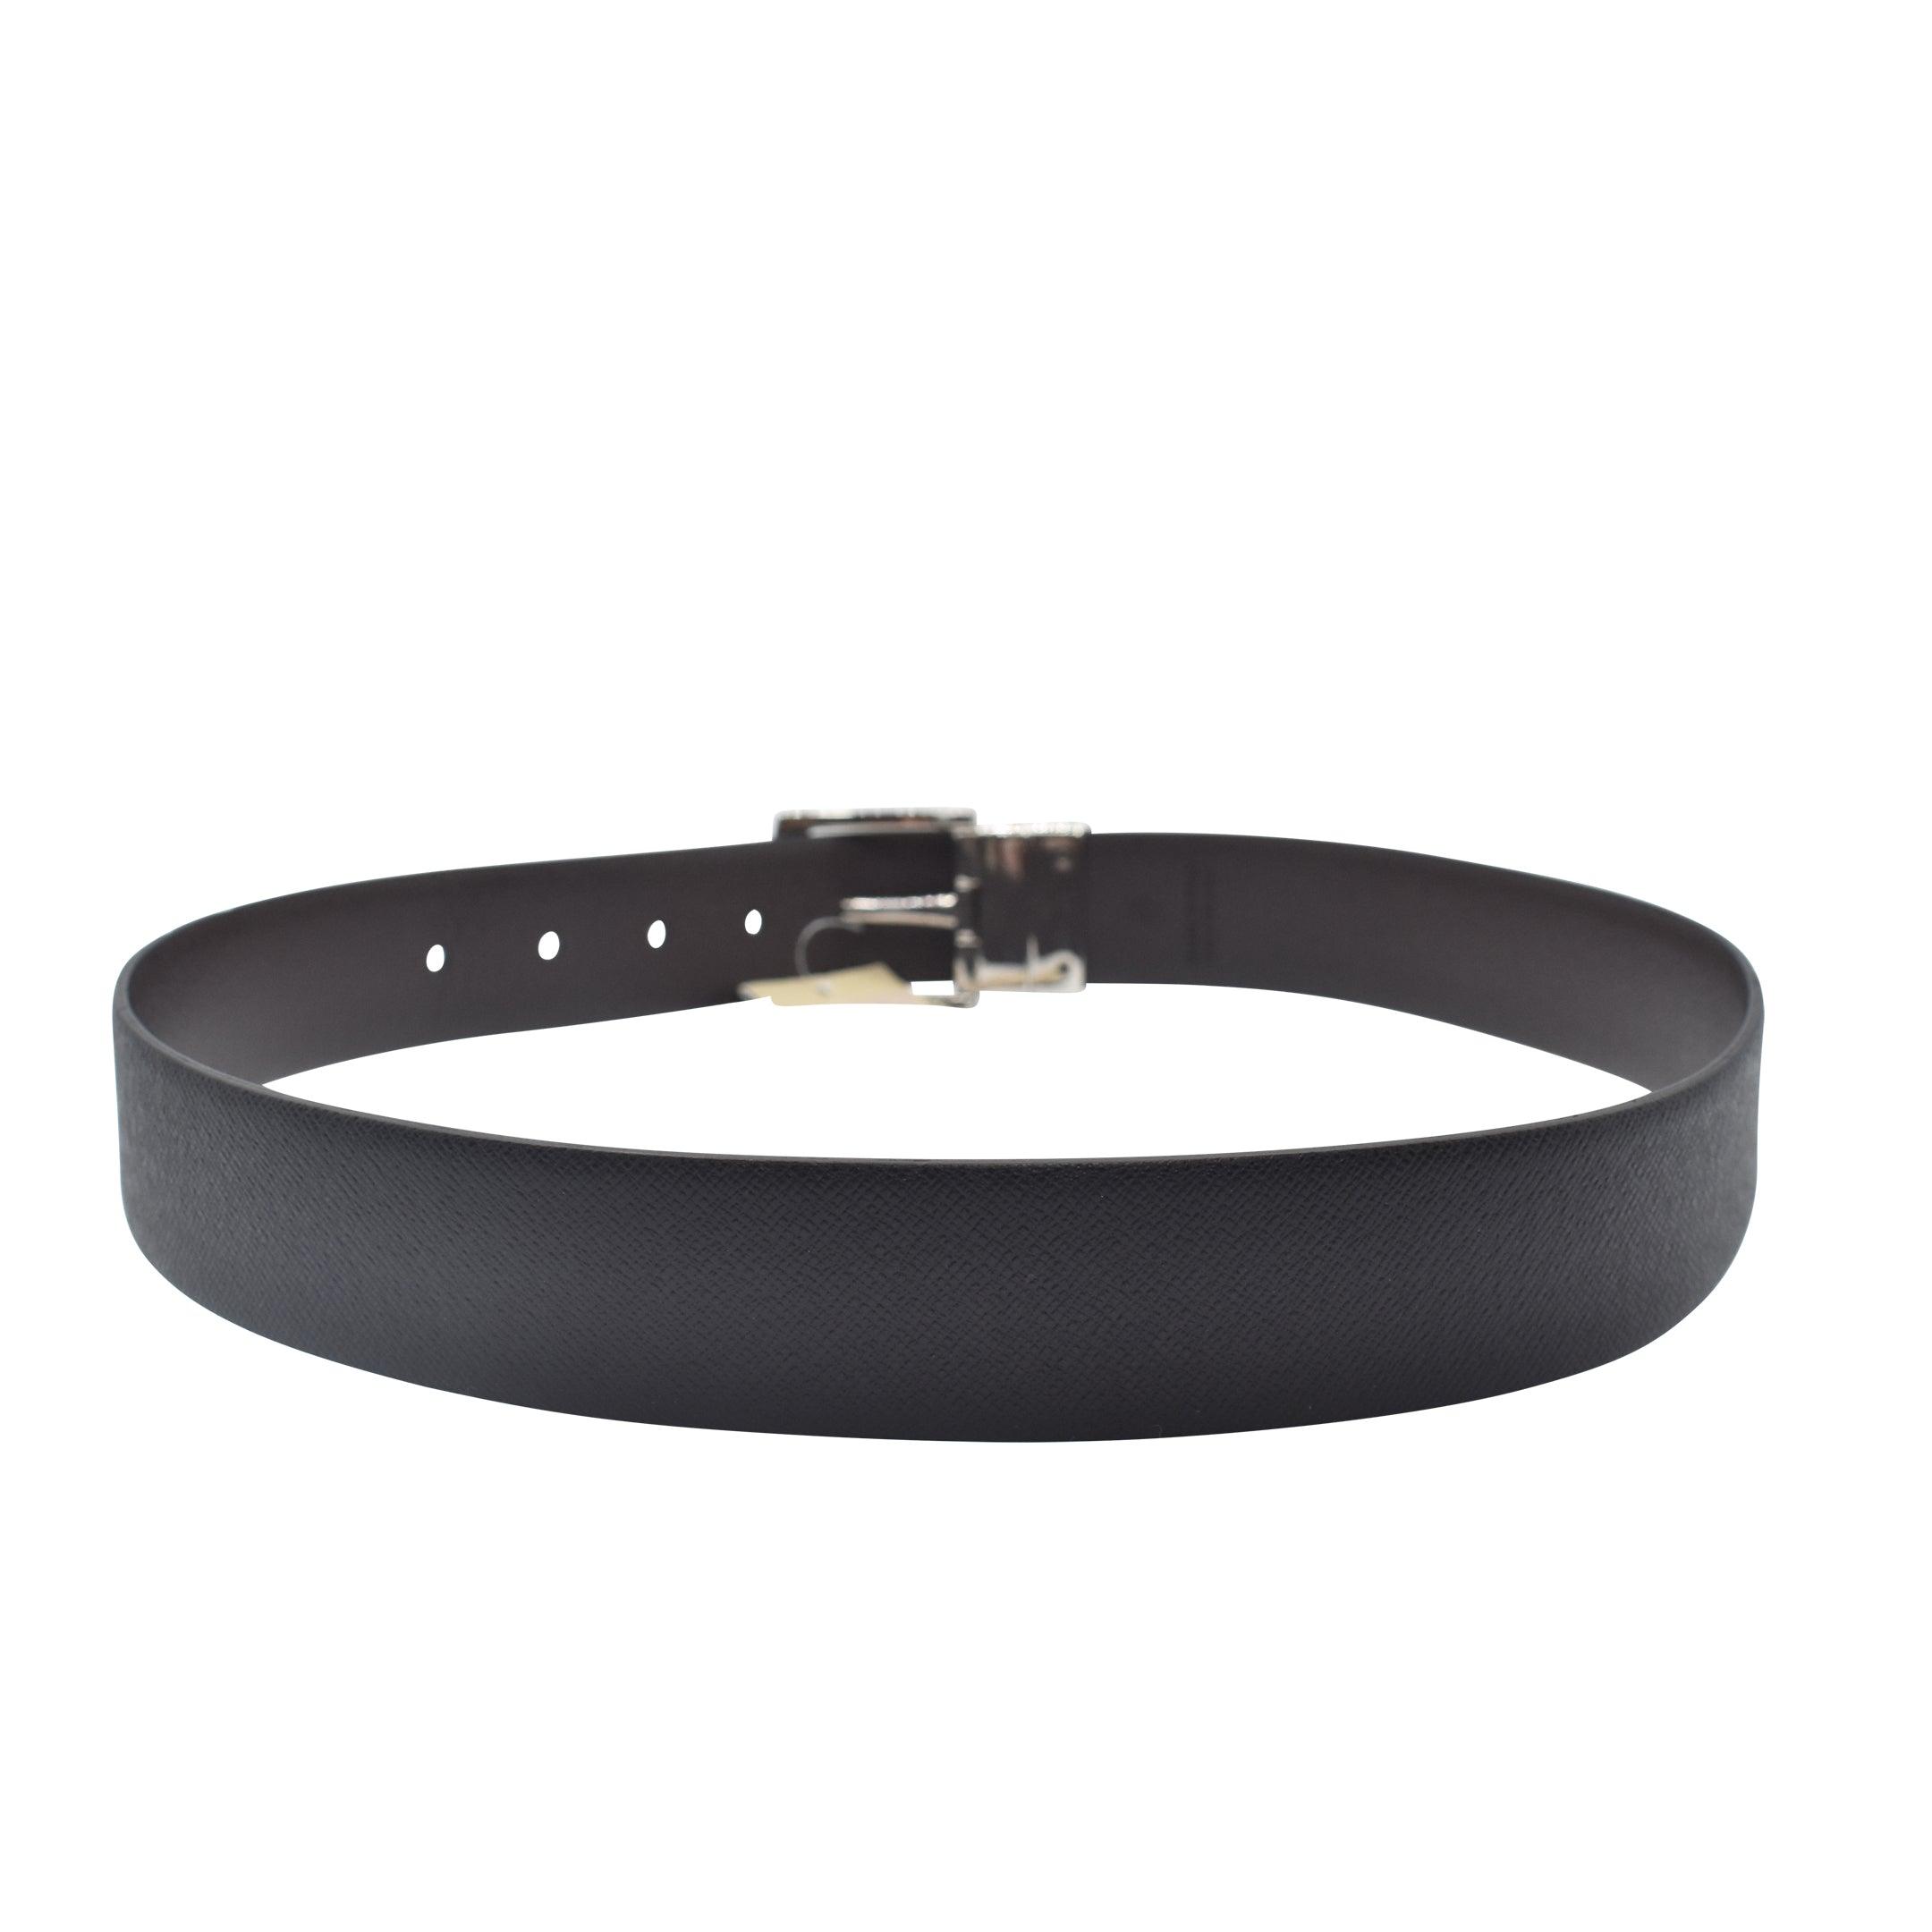 Burberry Belt - 30/75 - Fashionably Yours